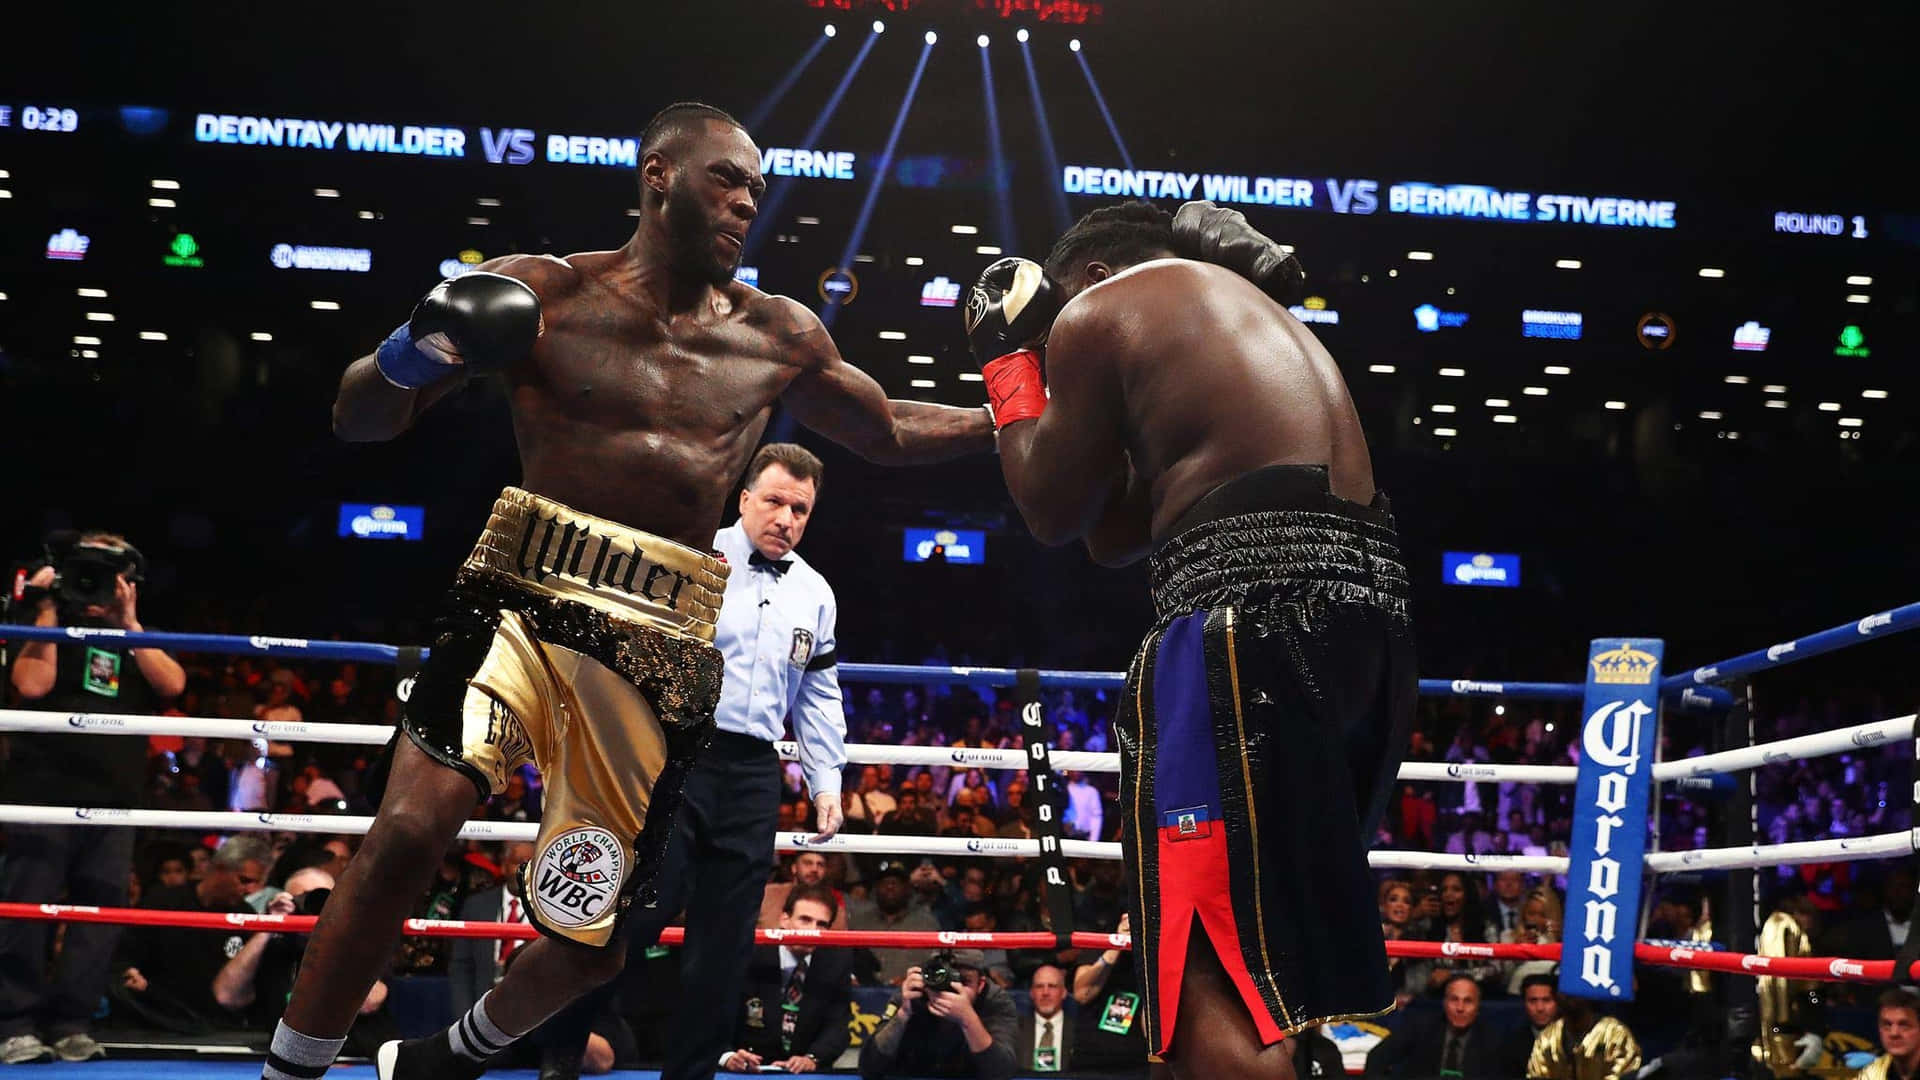 Deontay Wilder Dominating Boxing Match Wallpaper